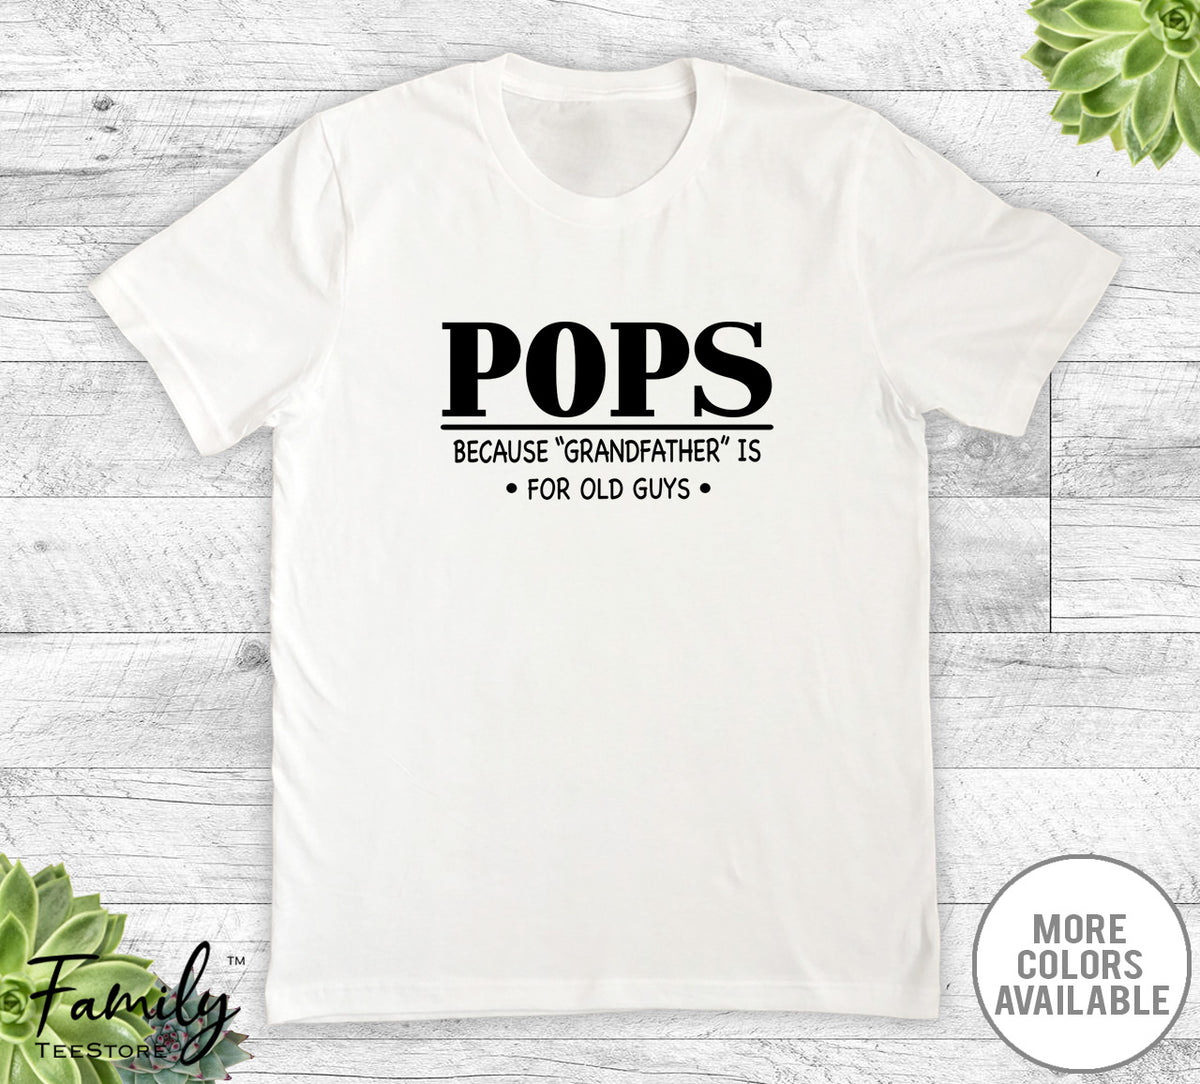 Pops Because Grandfather Is For Old Guys - Unisex T-shirt - Pops Shirt - Pops Gift